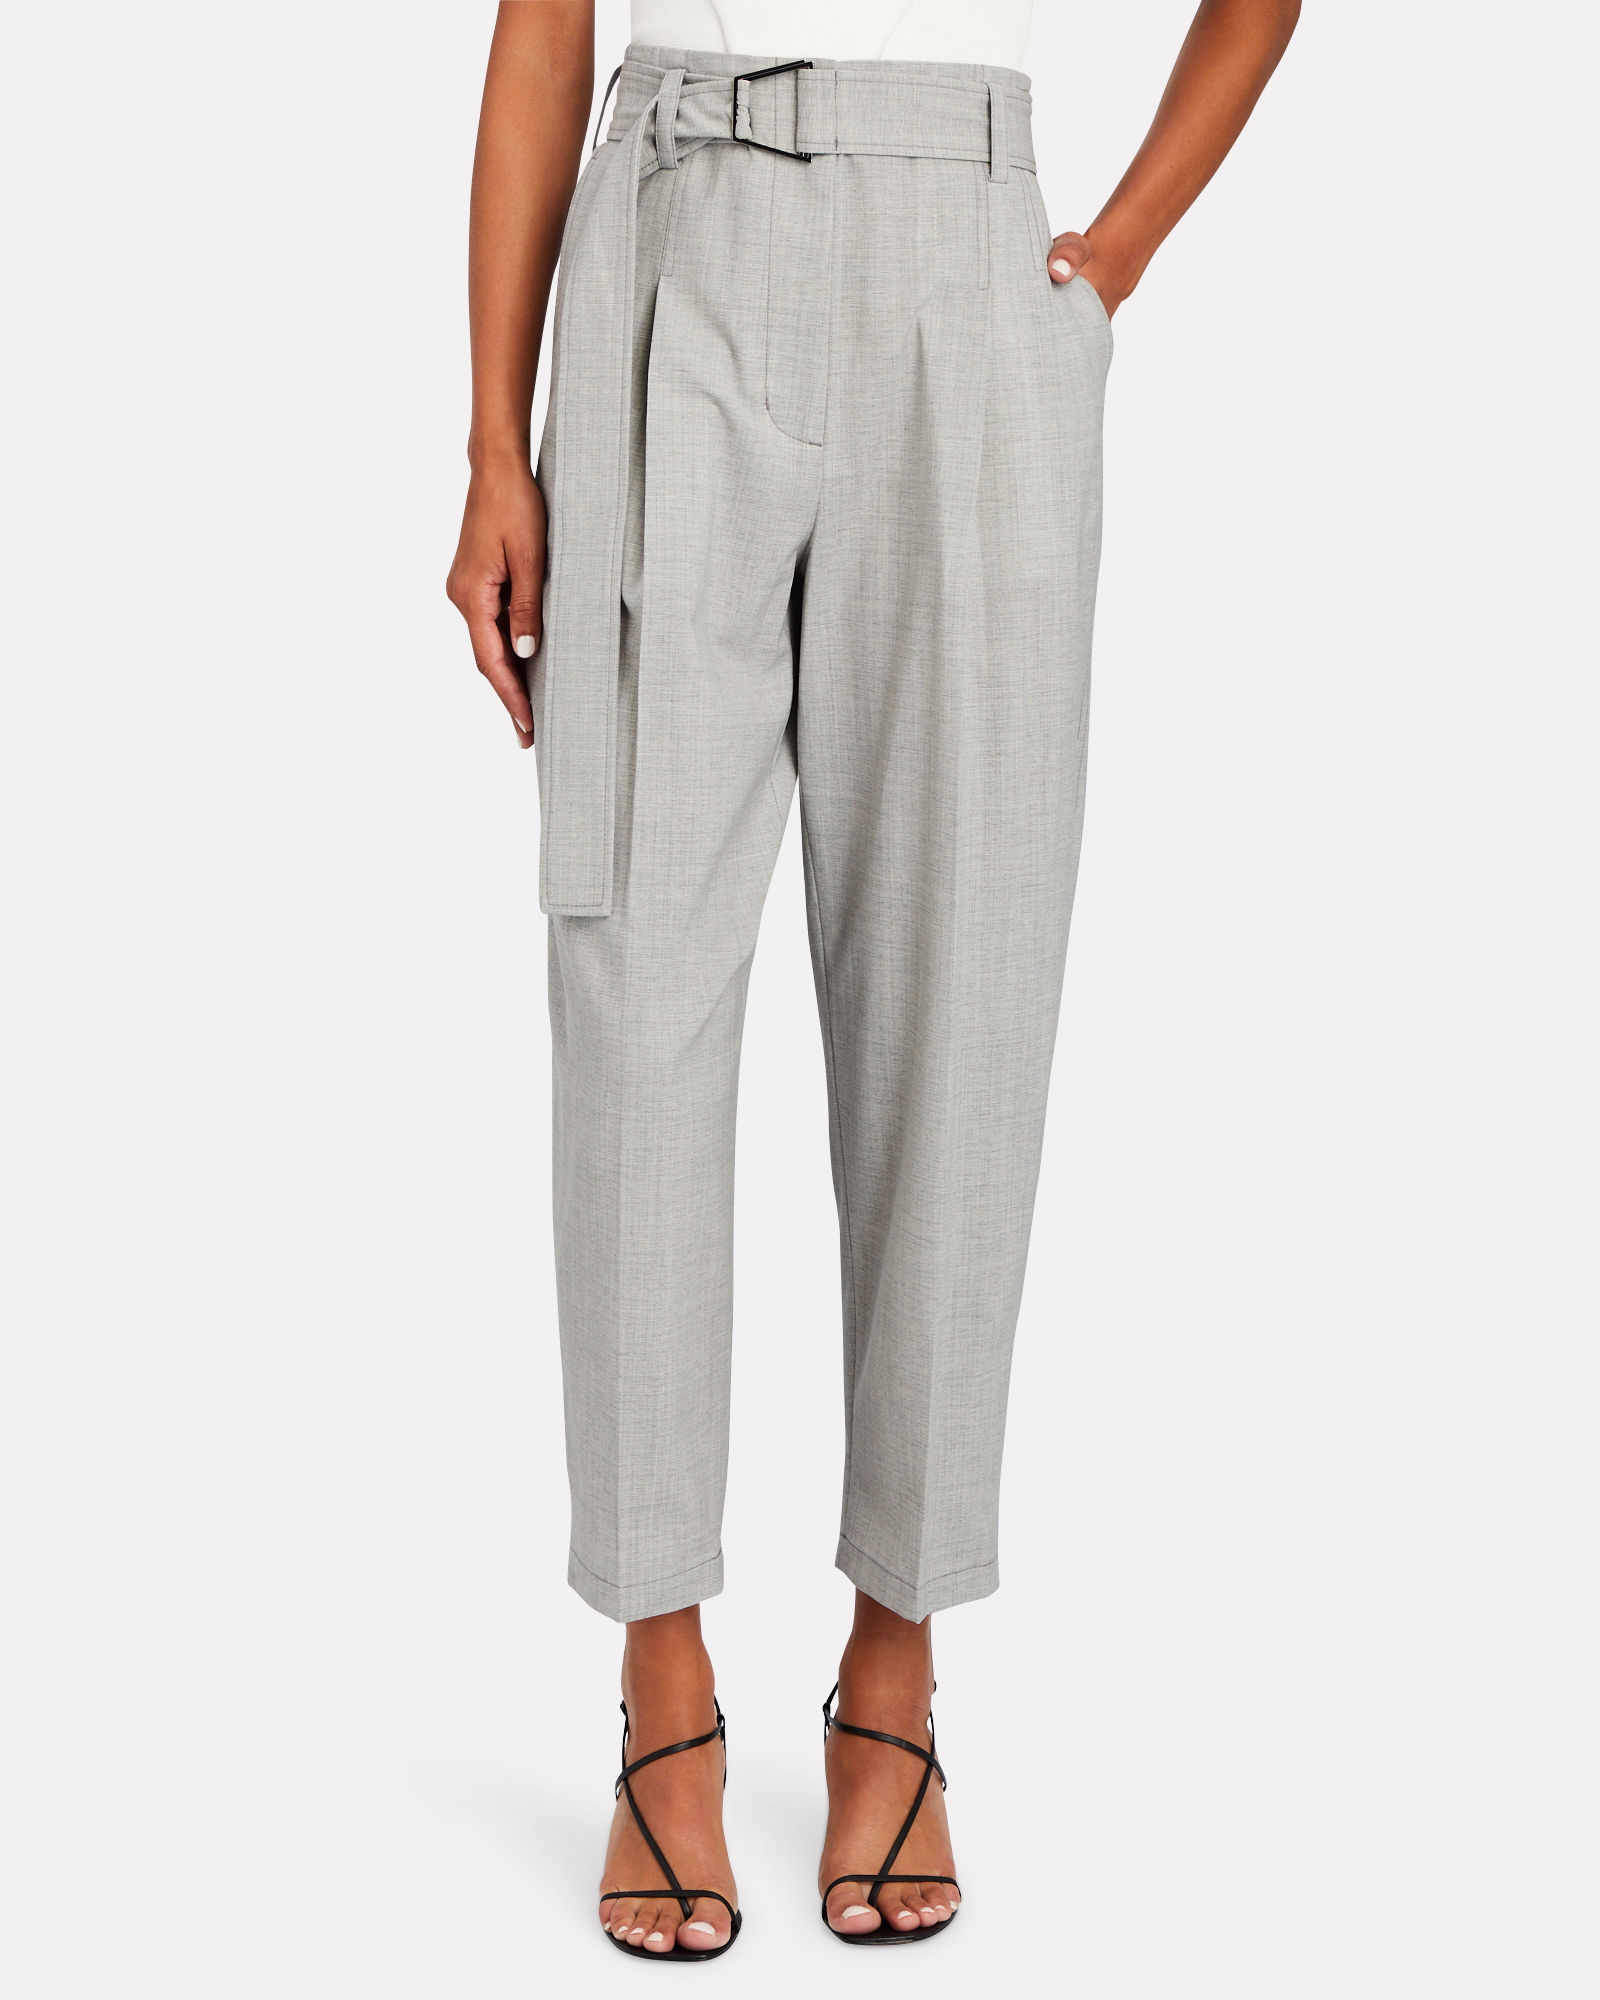 3.1 Phillip Lim Belted Utility Chambray Pants | INTERMIX®